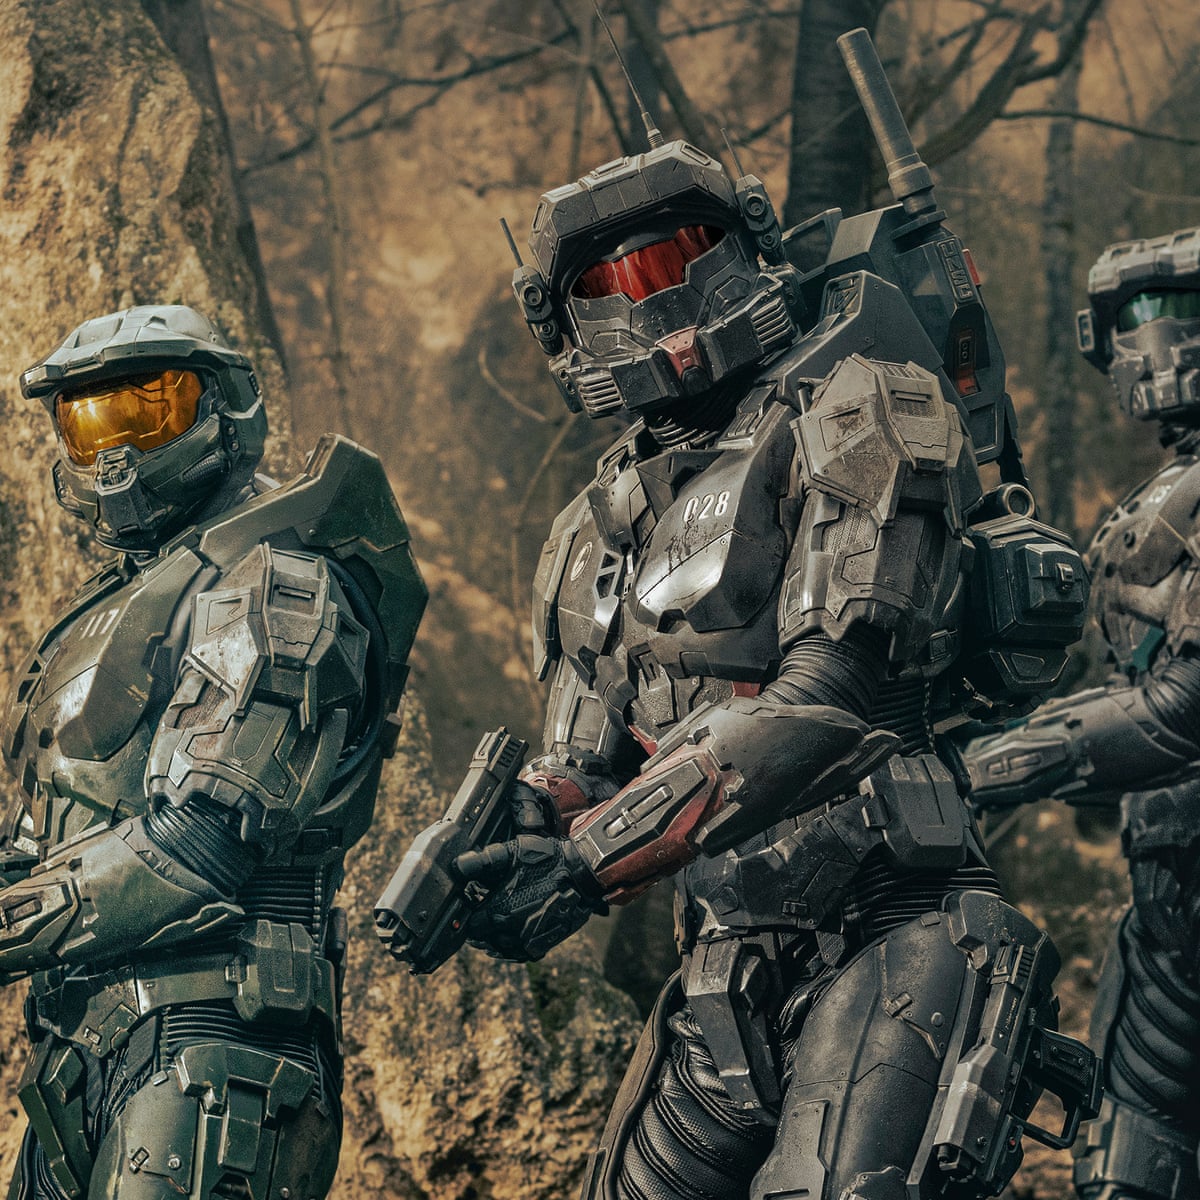 The Halo TV series will now debut on Paramount+ in early 2022